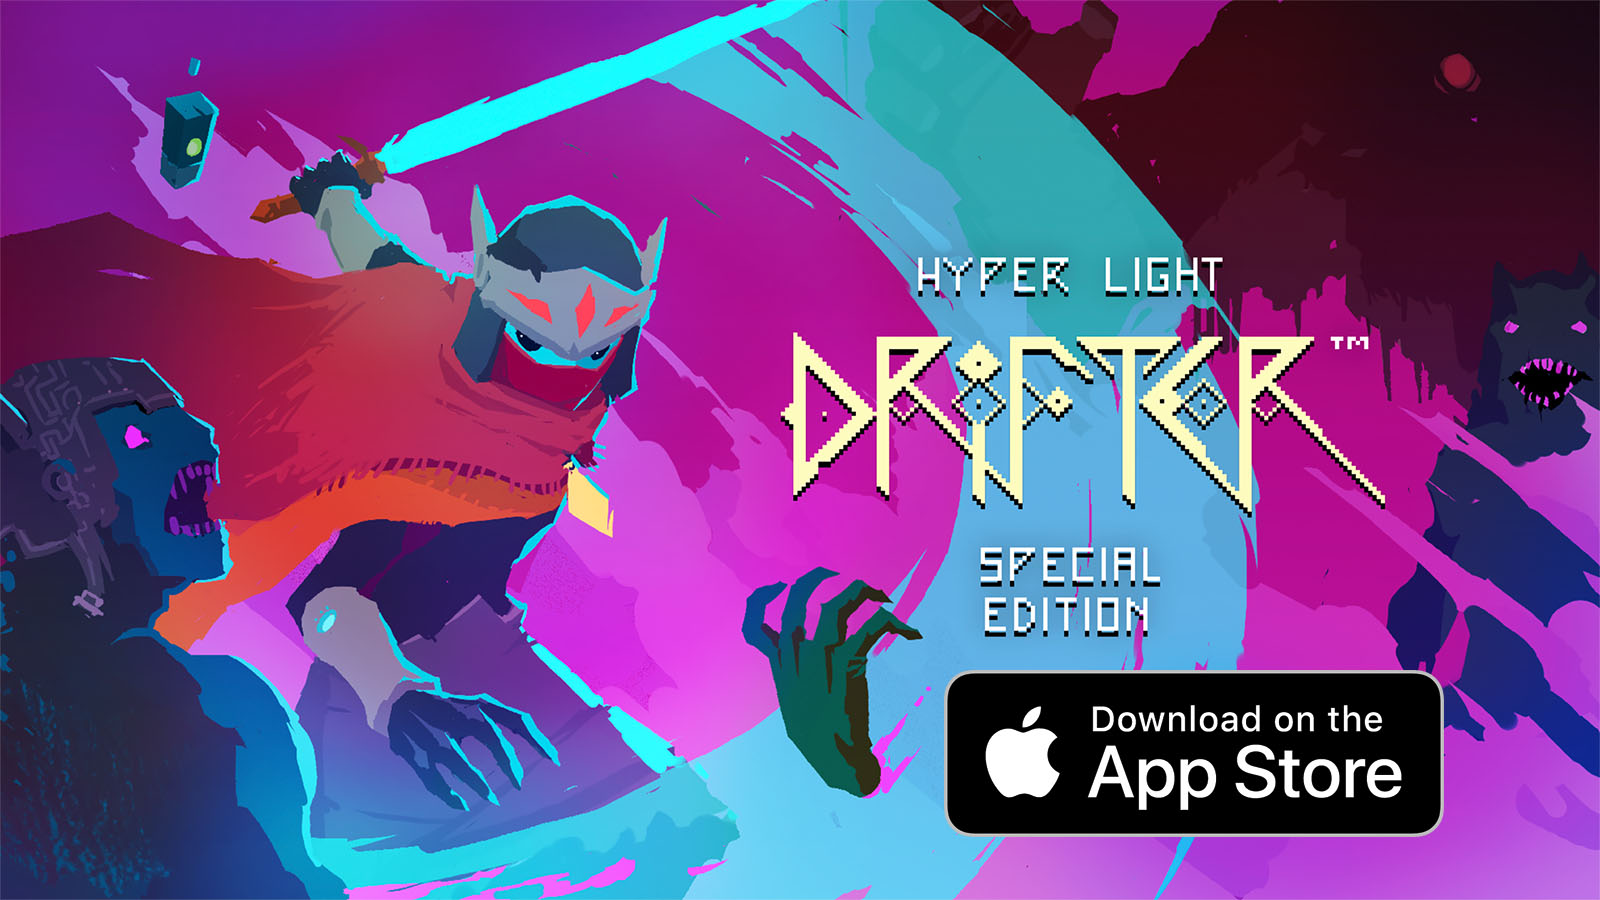 120 FPS: Hyper Light Drifter Special Edition now available on iOS